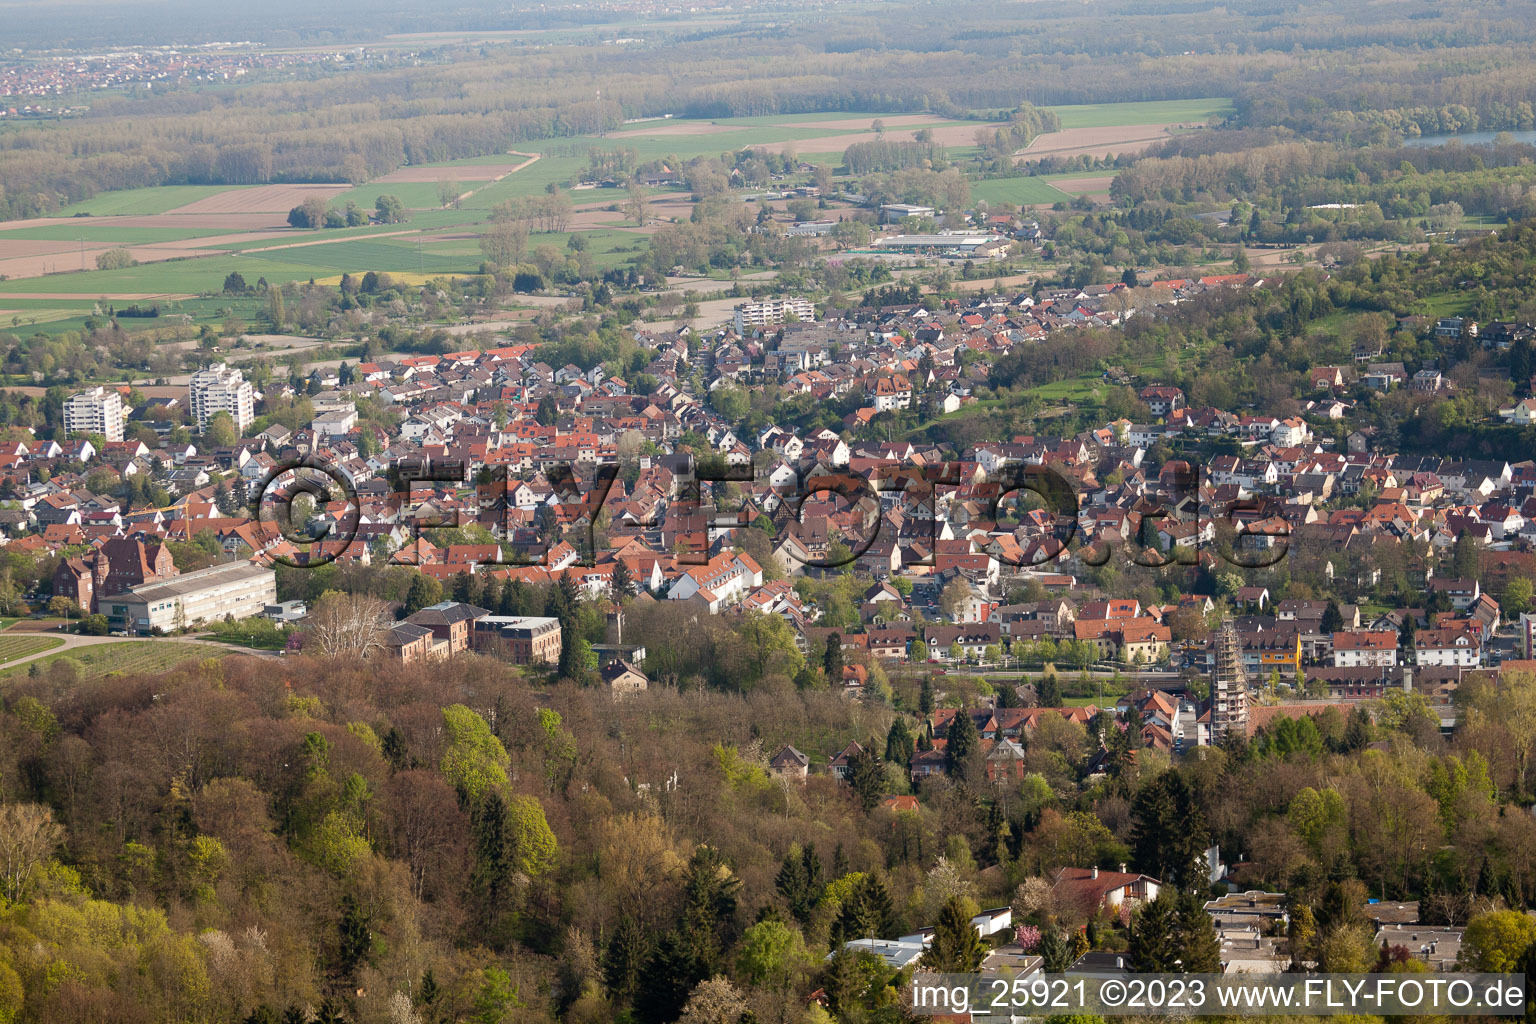 From the south in the district Grötzingen in Karlsruhe in the state Baden-Wuerttemberg, Germany